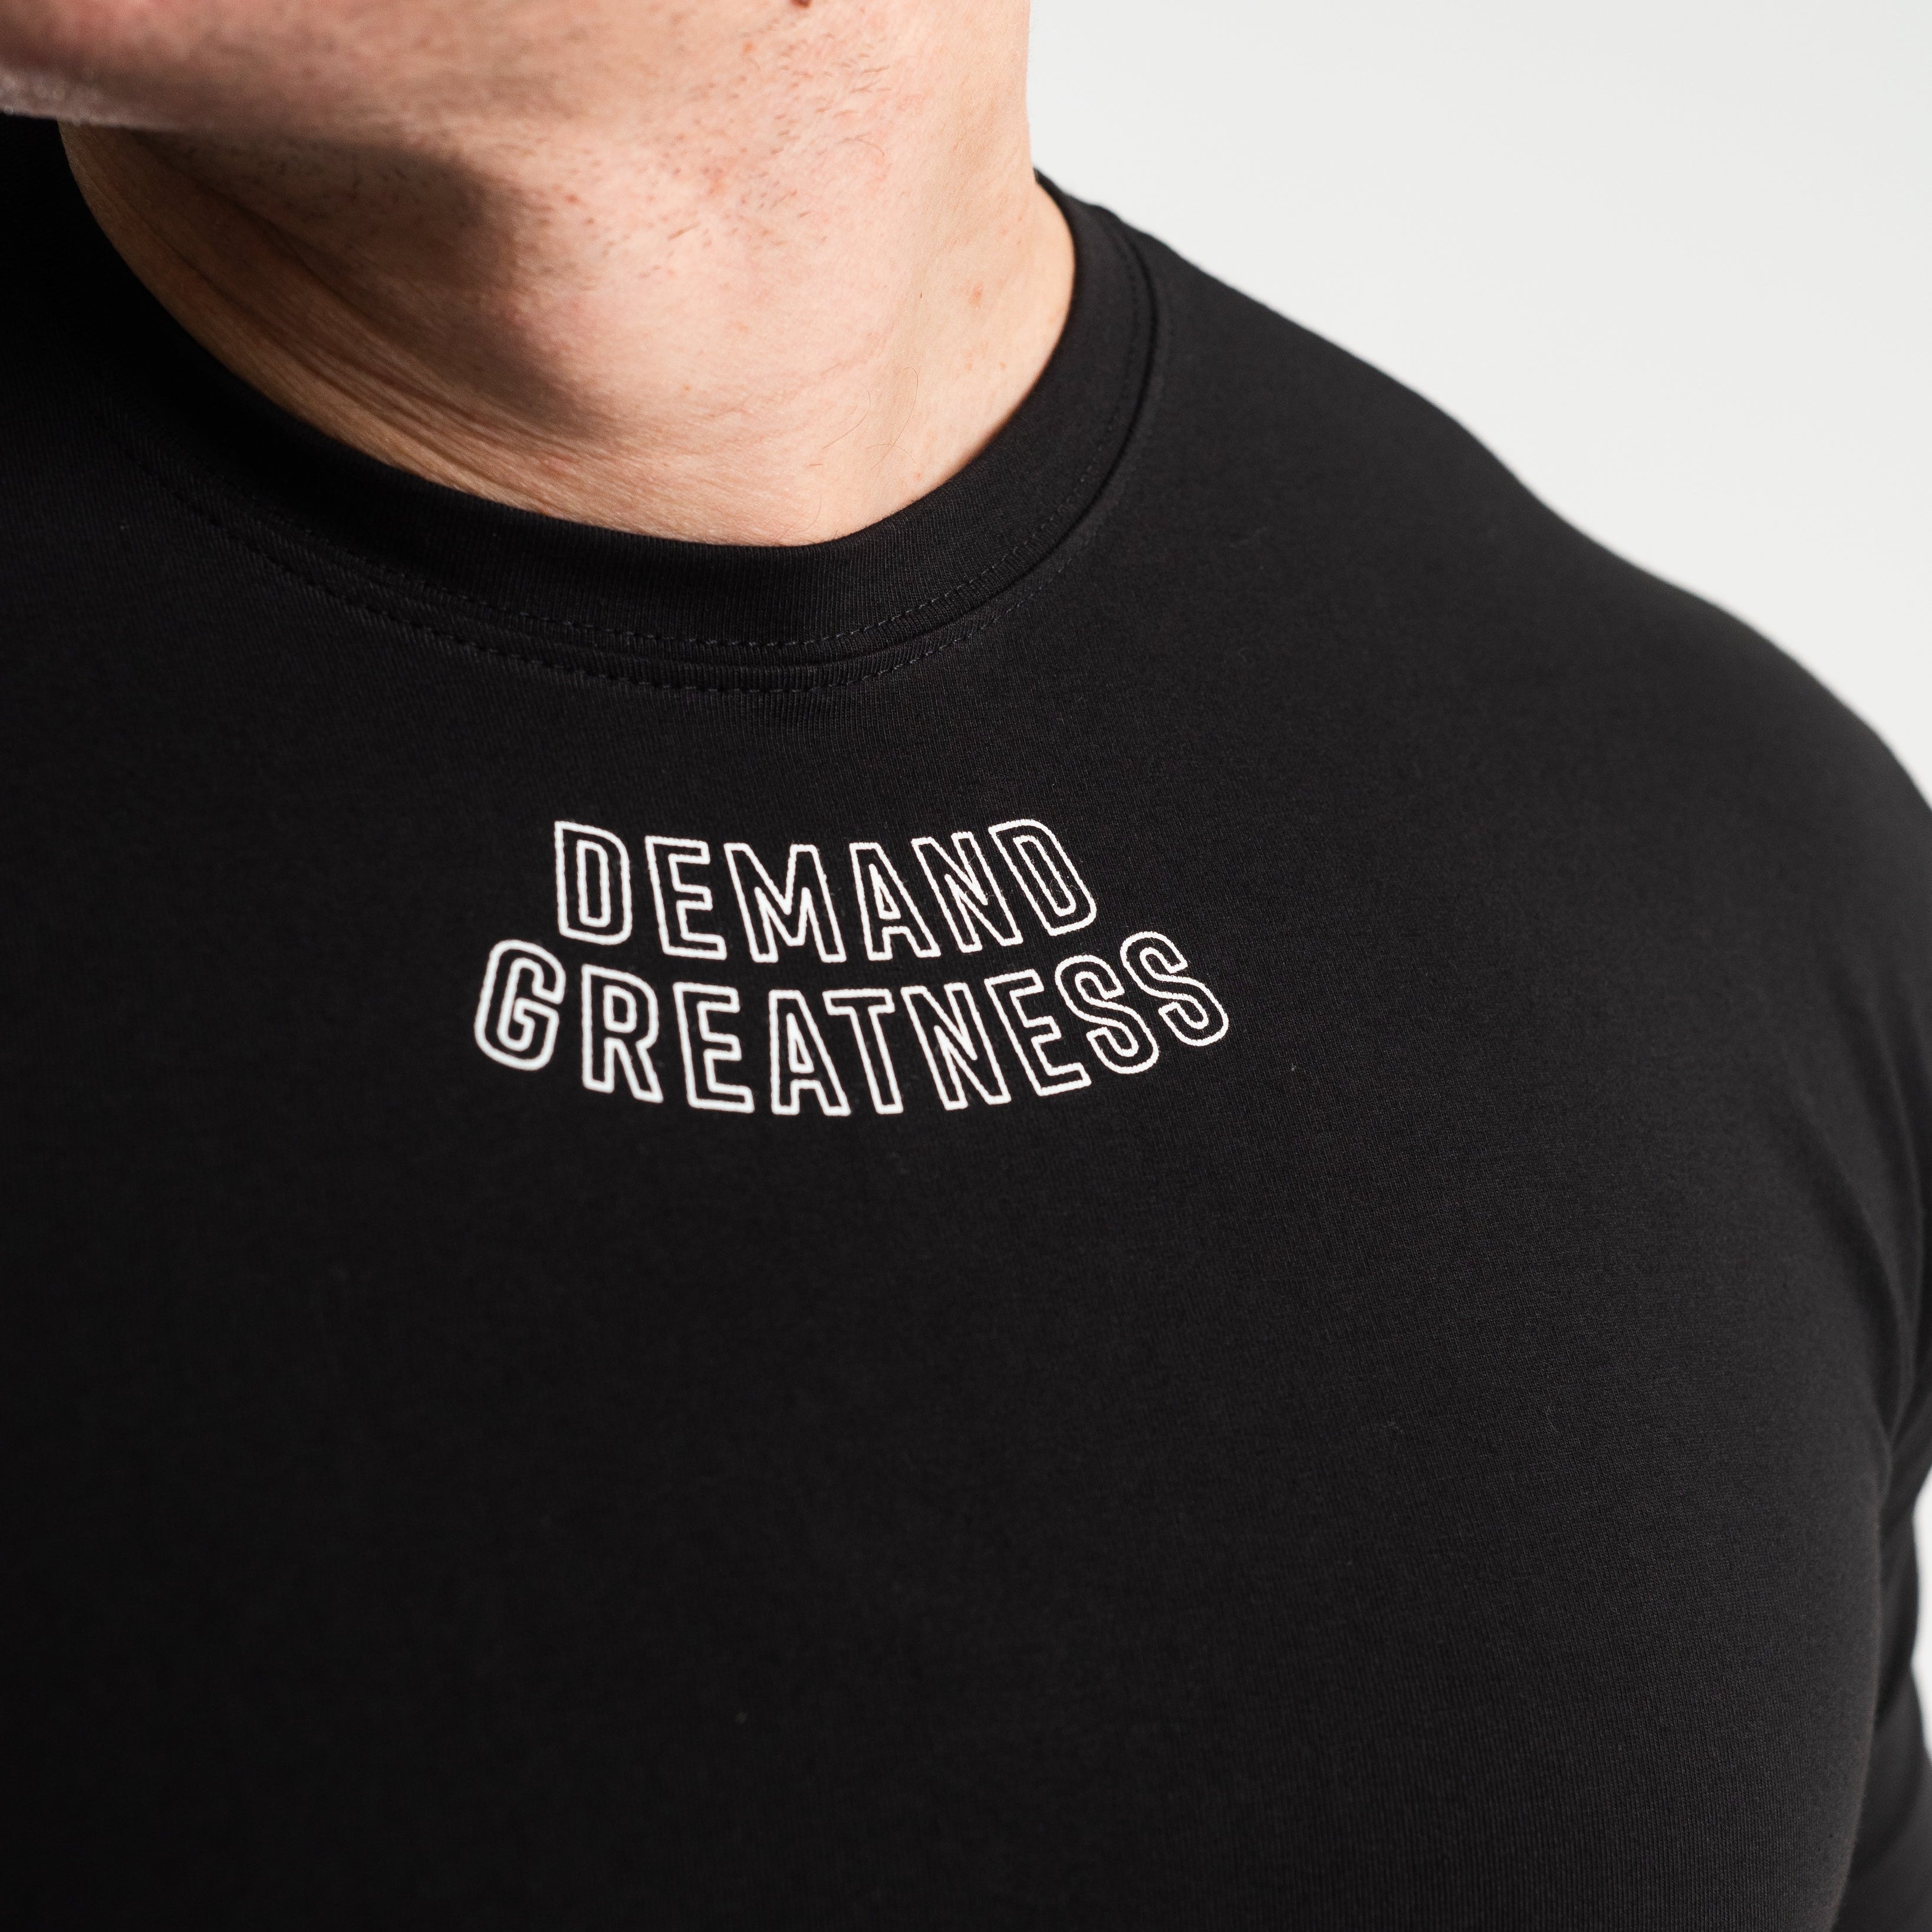 DG23 Domino is our new meet shirt design highlighting Demand Greatness with a double outline font to showcase your impact on the platform. The DG23 Meet Shirt is IPF Approved. Shop the full A7 Powerlifting IPF Approved Equipment collection. The IPF Approved Kit includes Powerlifting Singlet, A7 Meet Shirt, A7 Zebra Wrist Wraps, A7 Deadlift Socks, Hourglass Knee Sleeves (Stiff Knee Sleeves and Rigor Mortis Knee Sleeves). All A7 Powerlifting Equipment shipping to UK, Norway, Switzerland and Iceland.